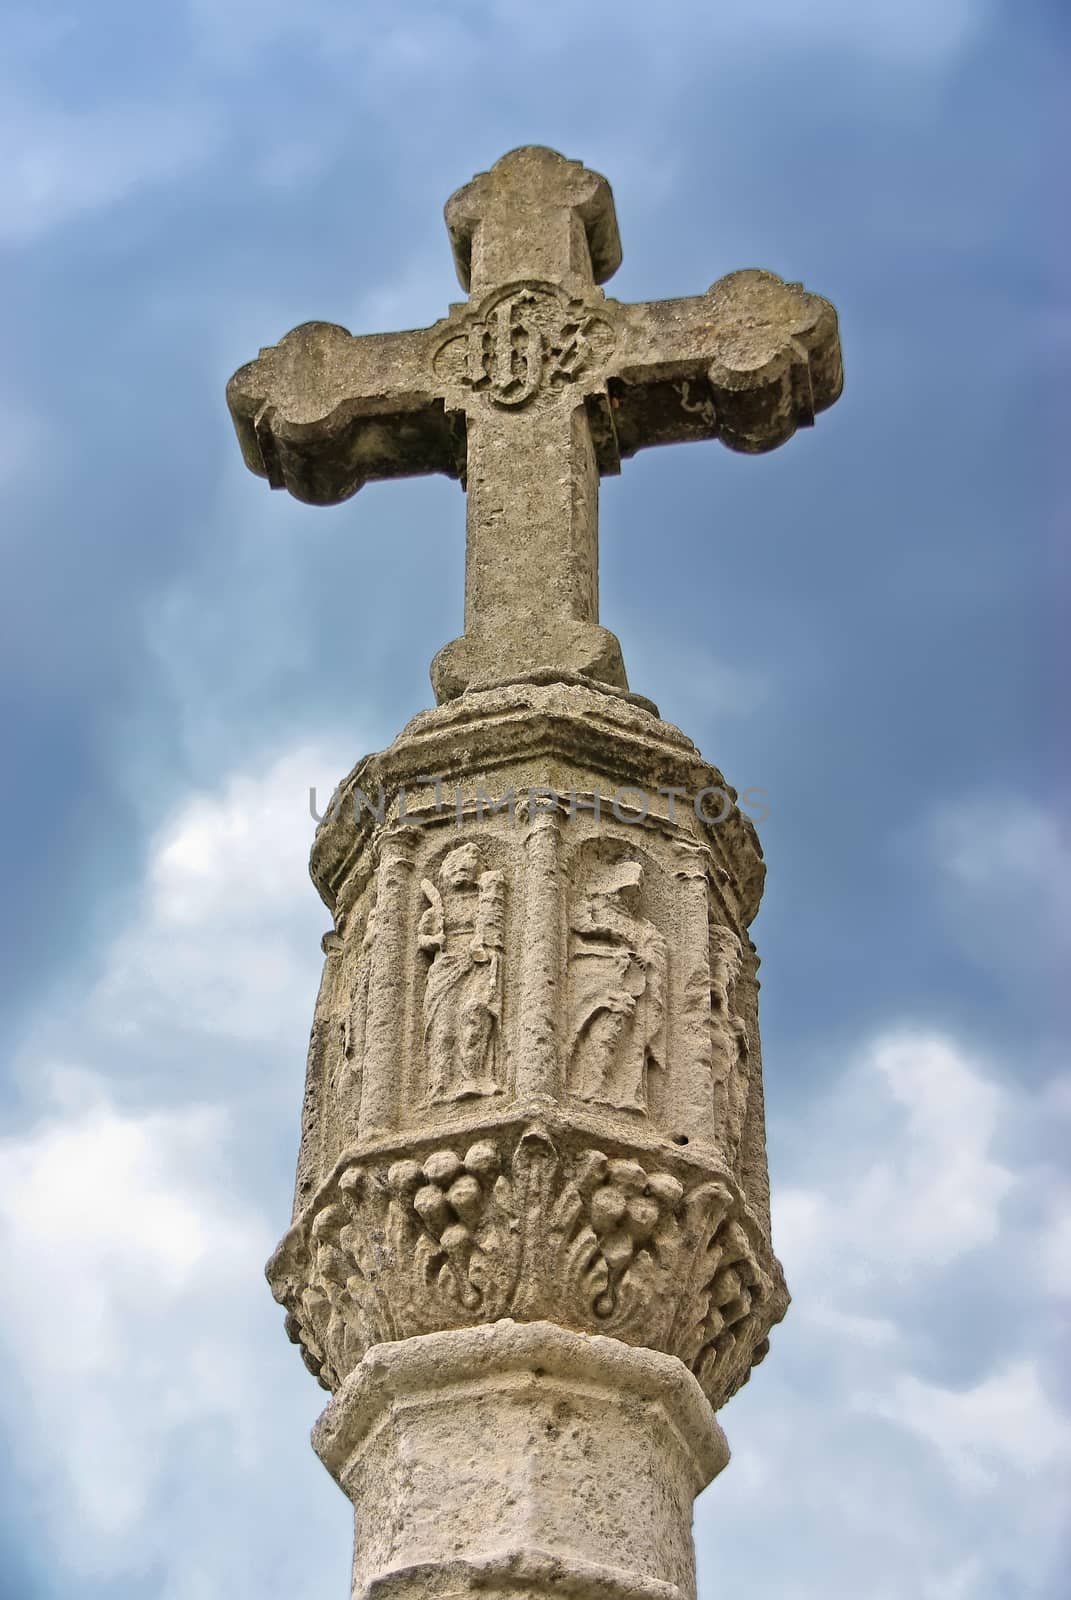 Medieval Cross in Majorca located at the border of some towns